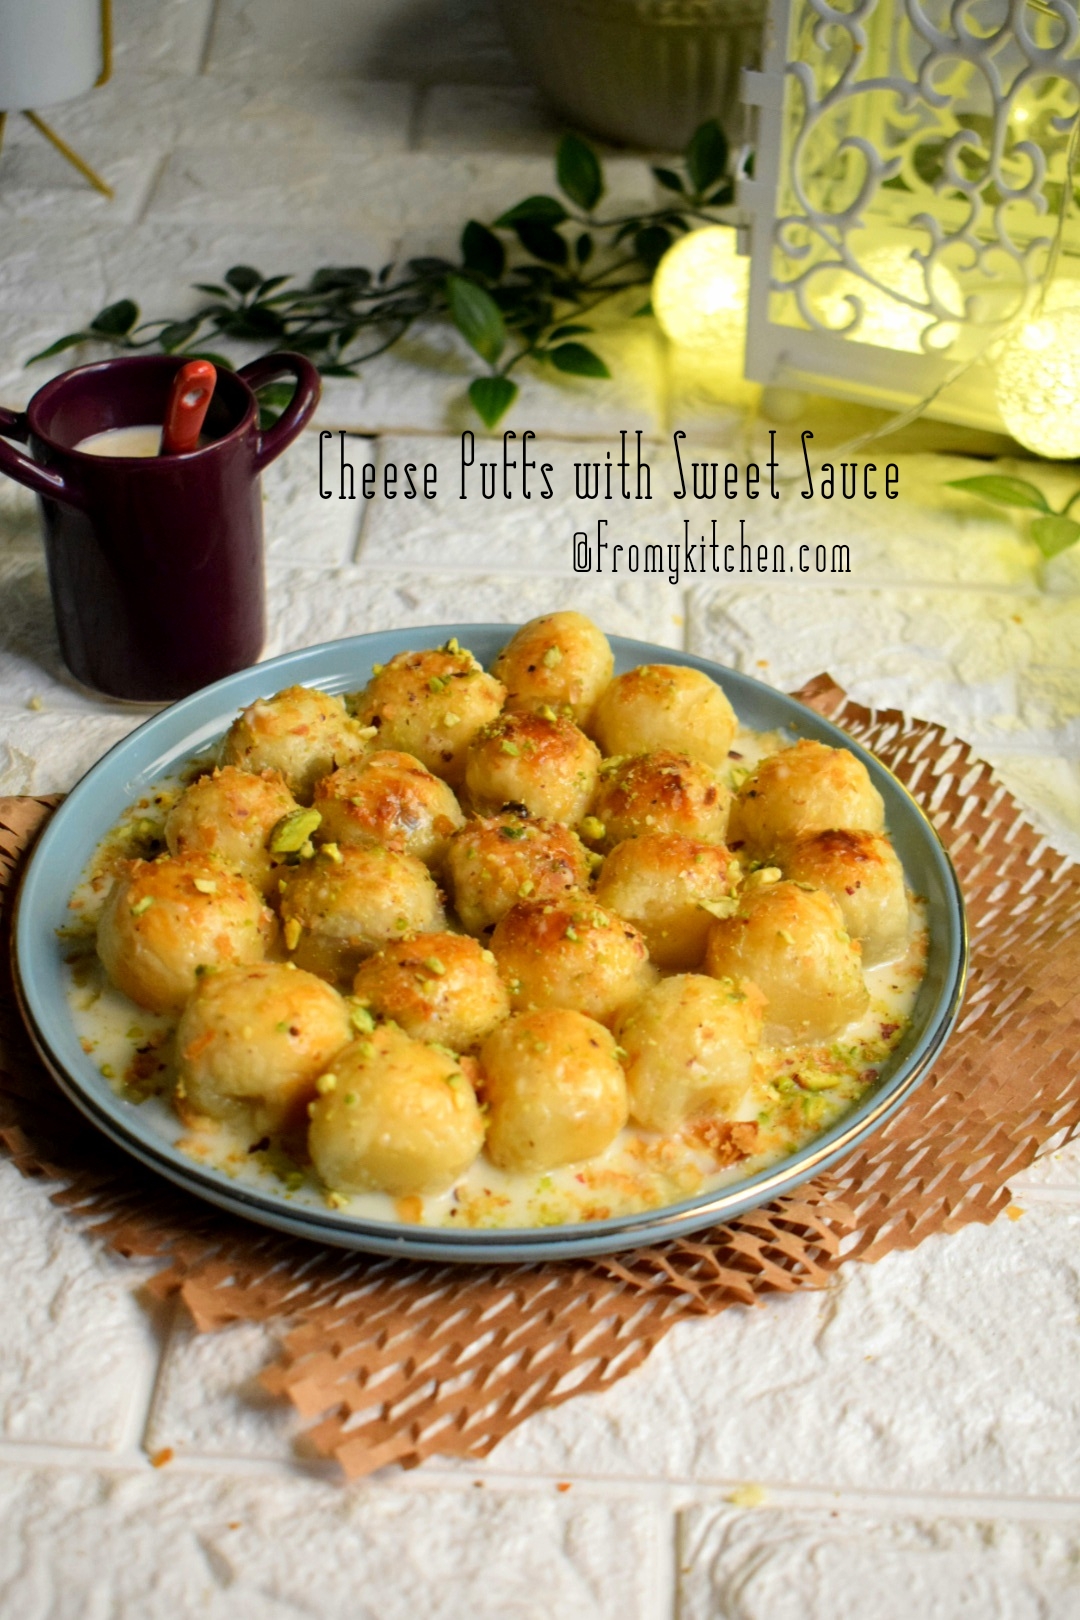 Cheese Puffs with Sweet Sauce